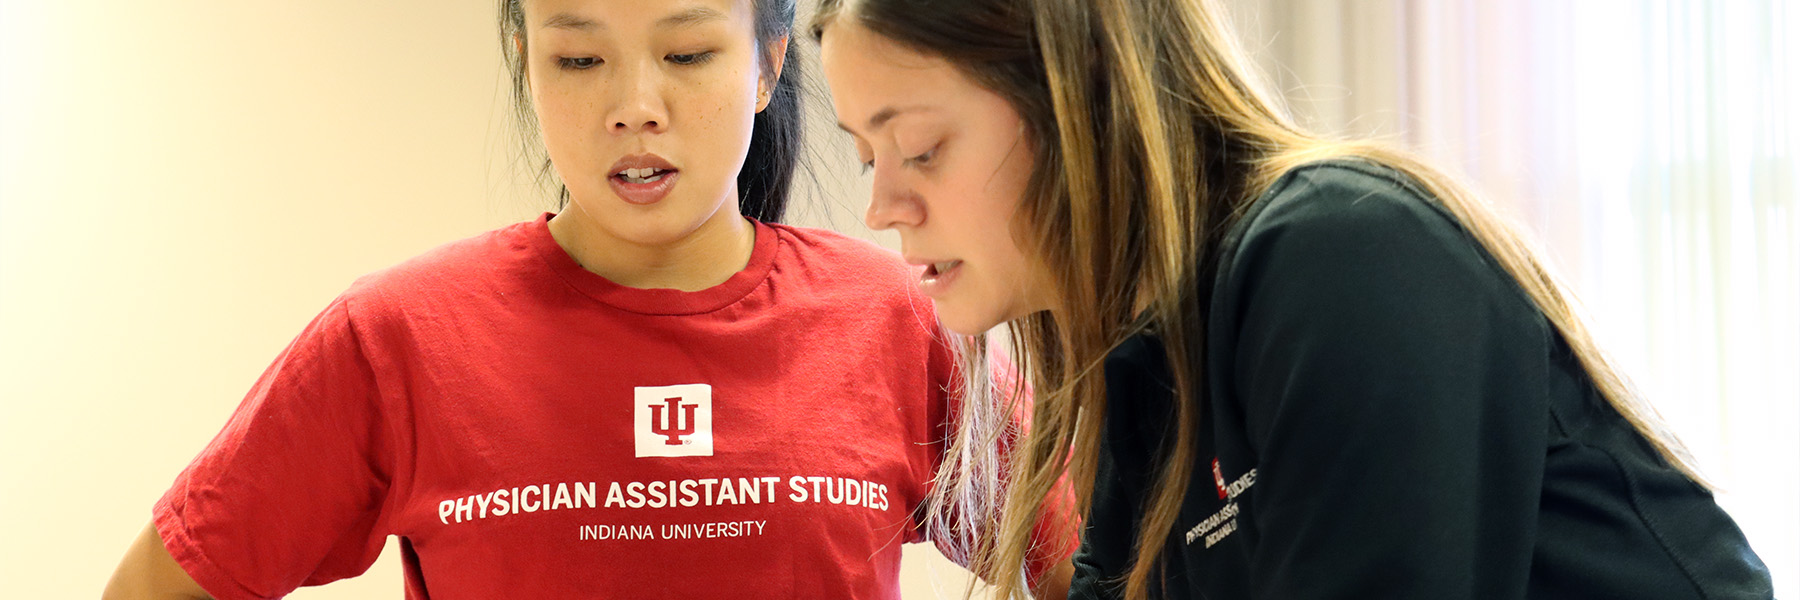 Two students in IU Physicians Assistant tee shirts work lean toward each other talking